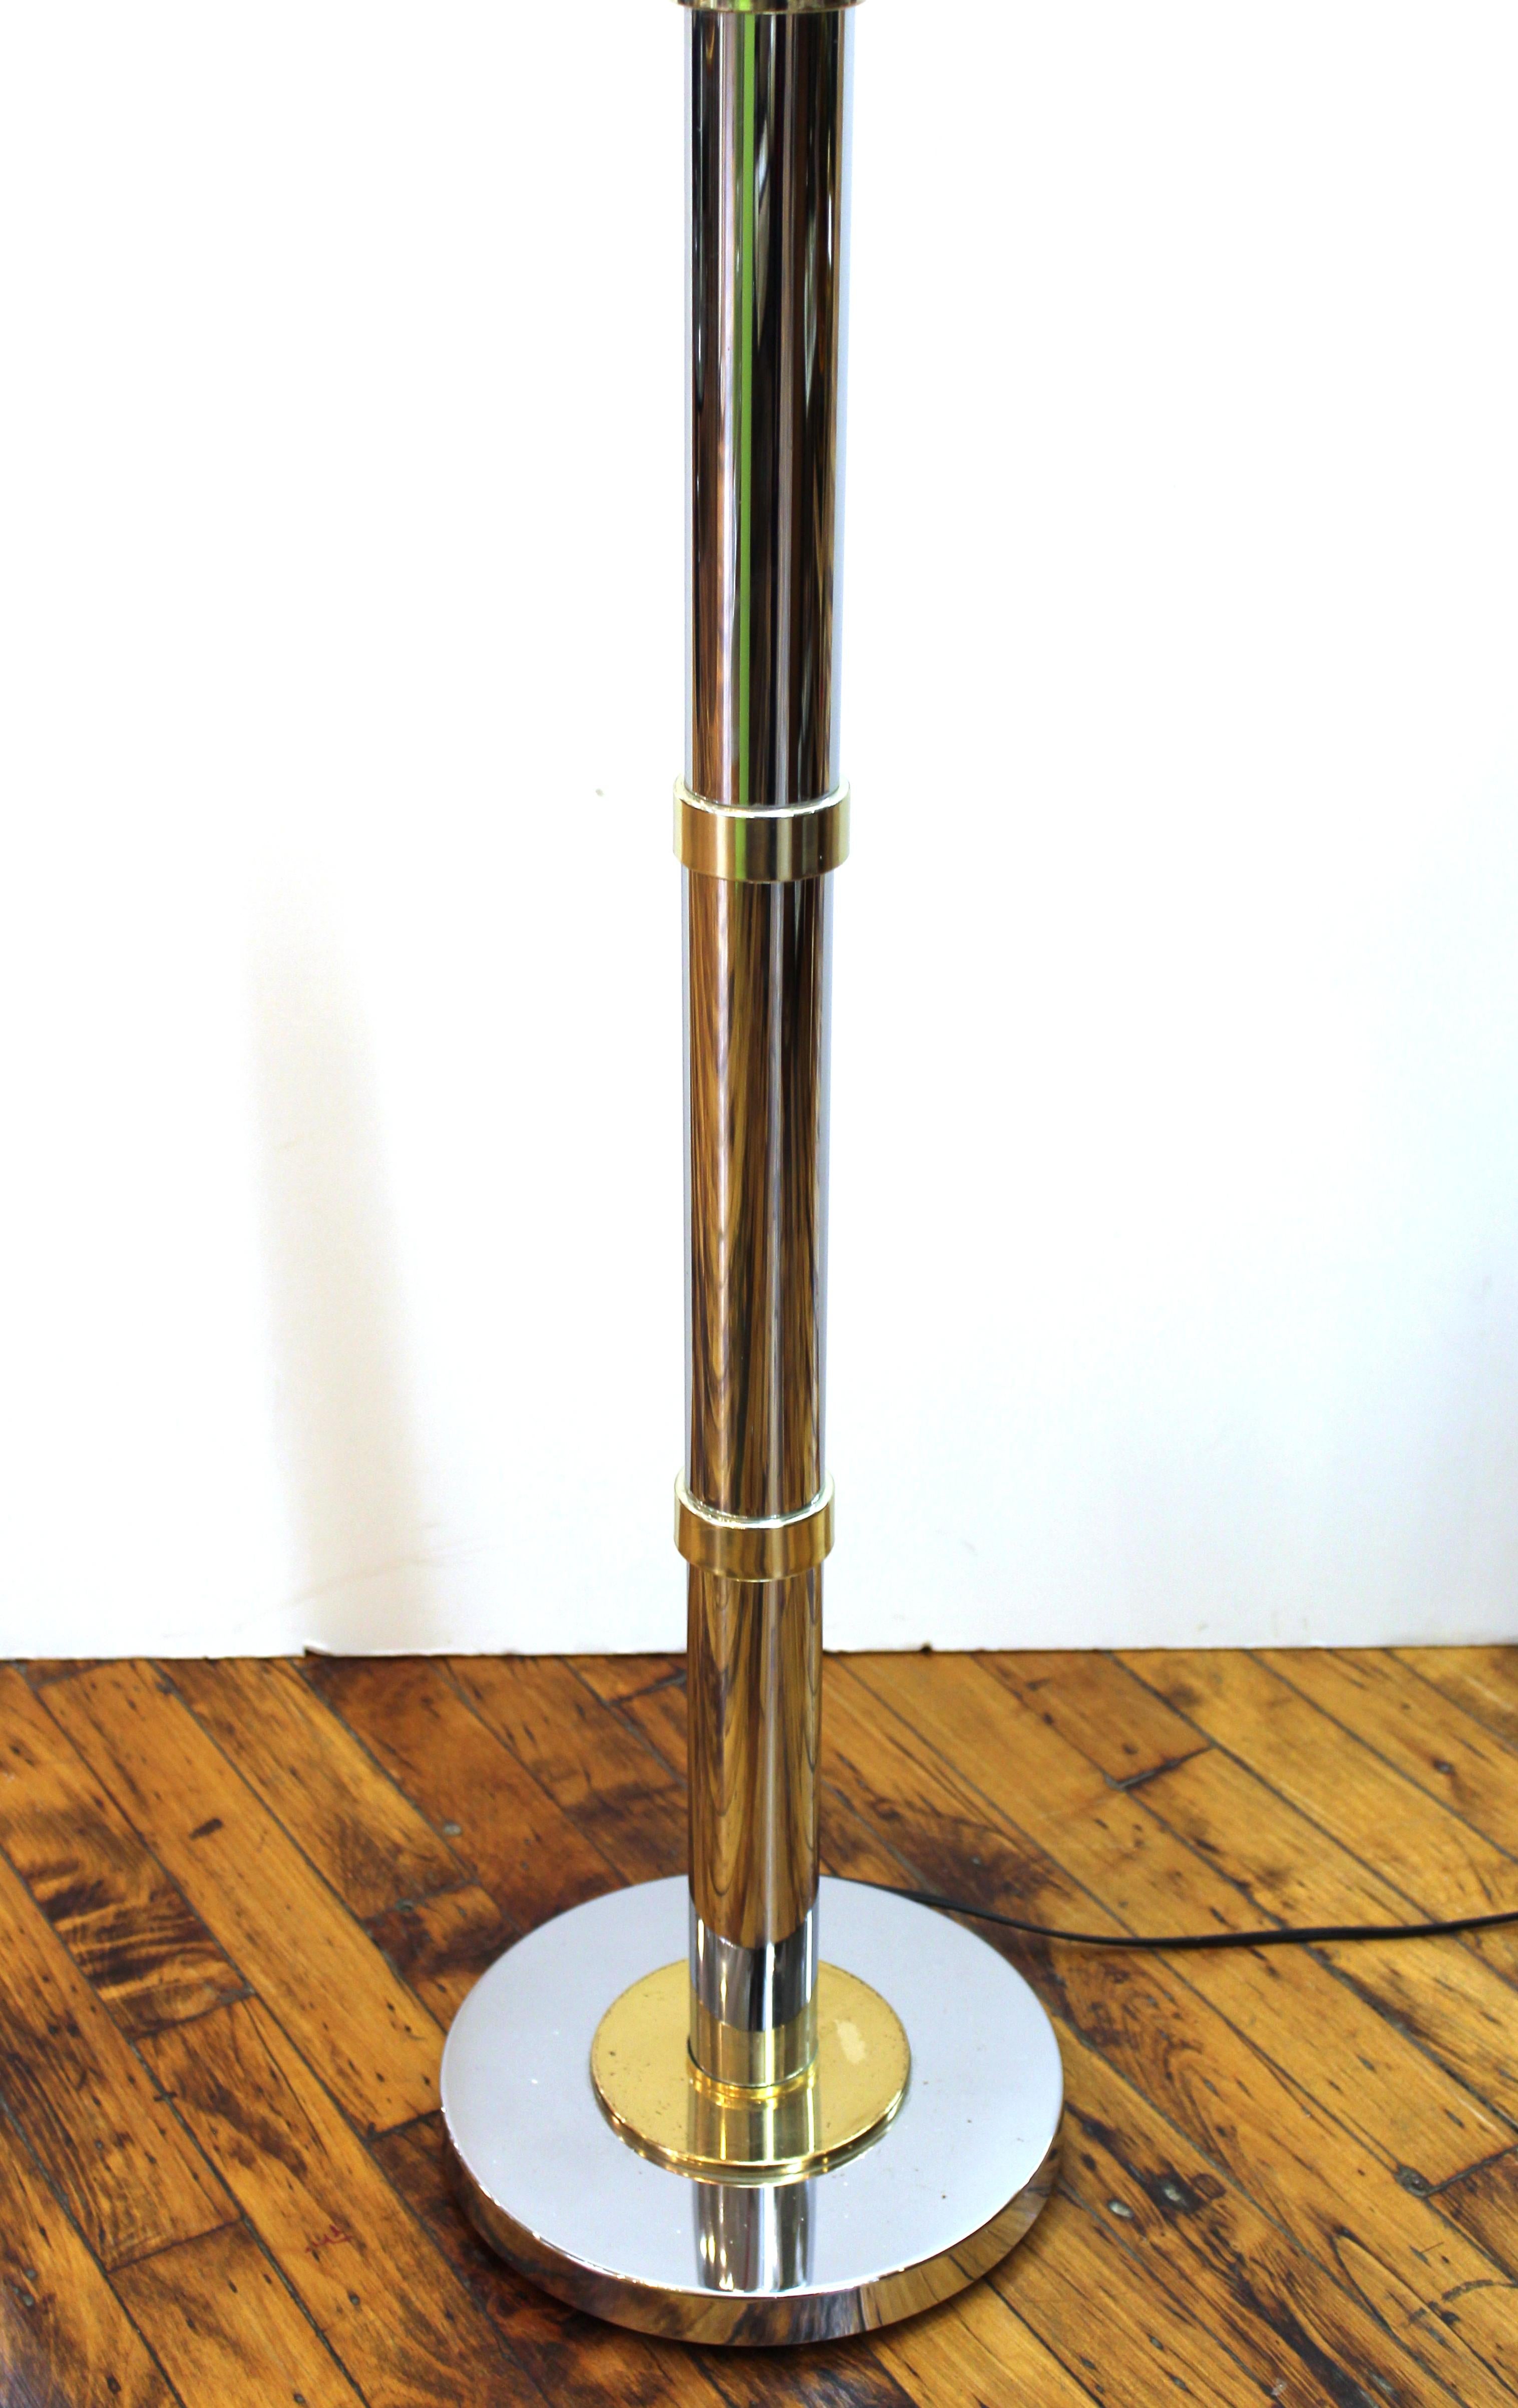 Mid-Century Modern chrome and brass banded floor lamp with fabric shade, made in the 1970s in the united states. Unmarked with wear consistent with age and use.